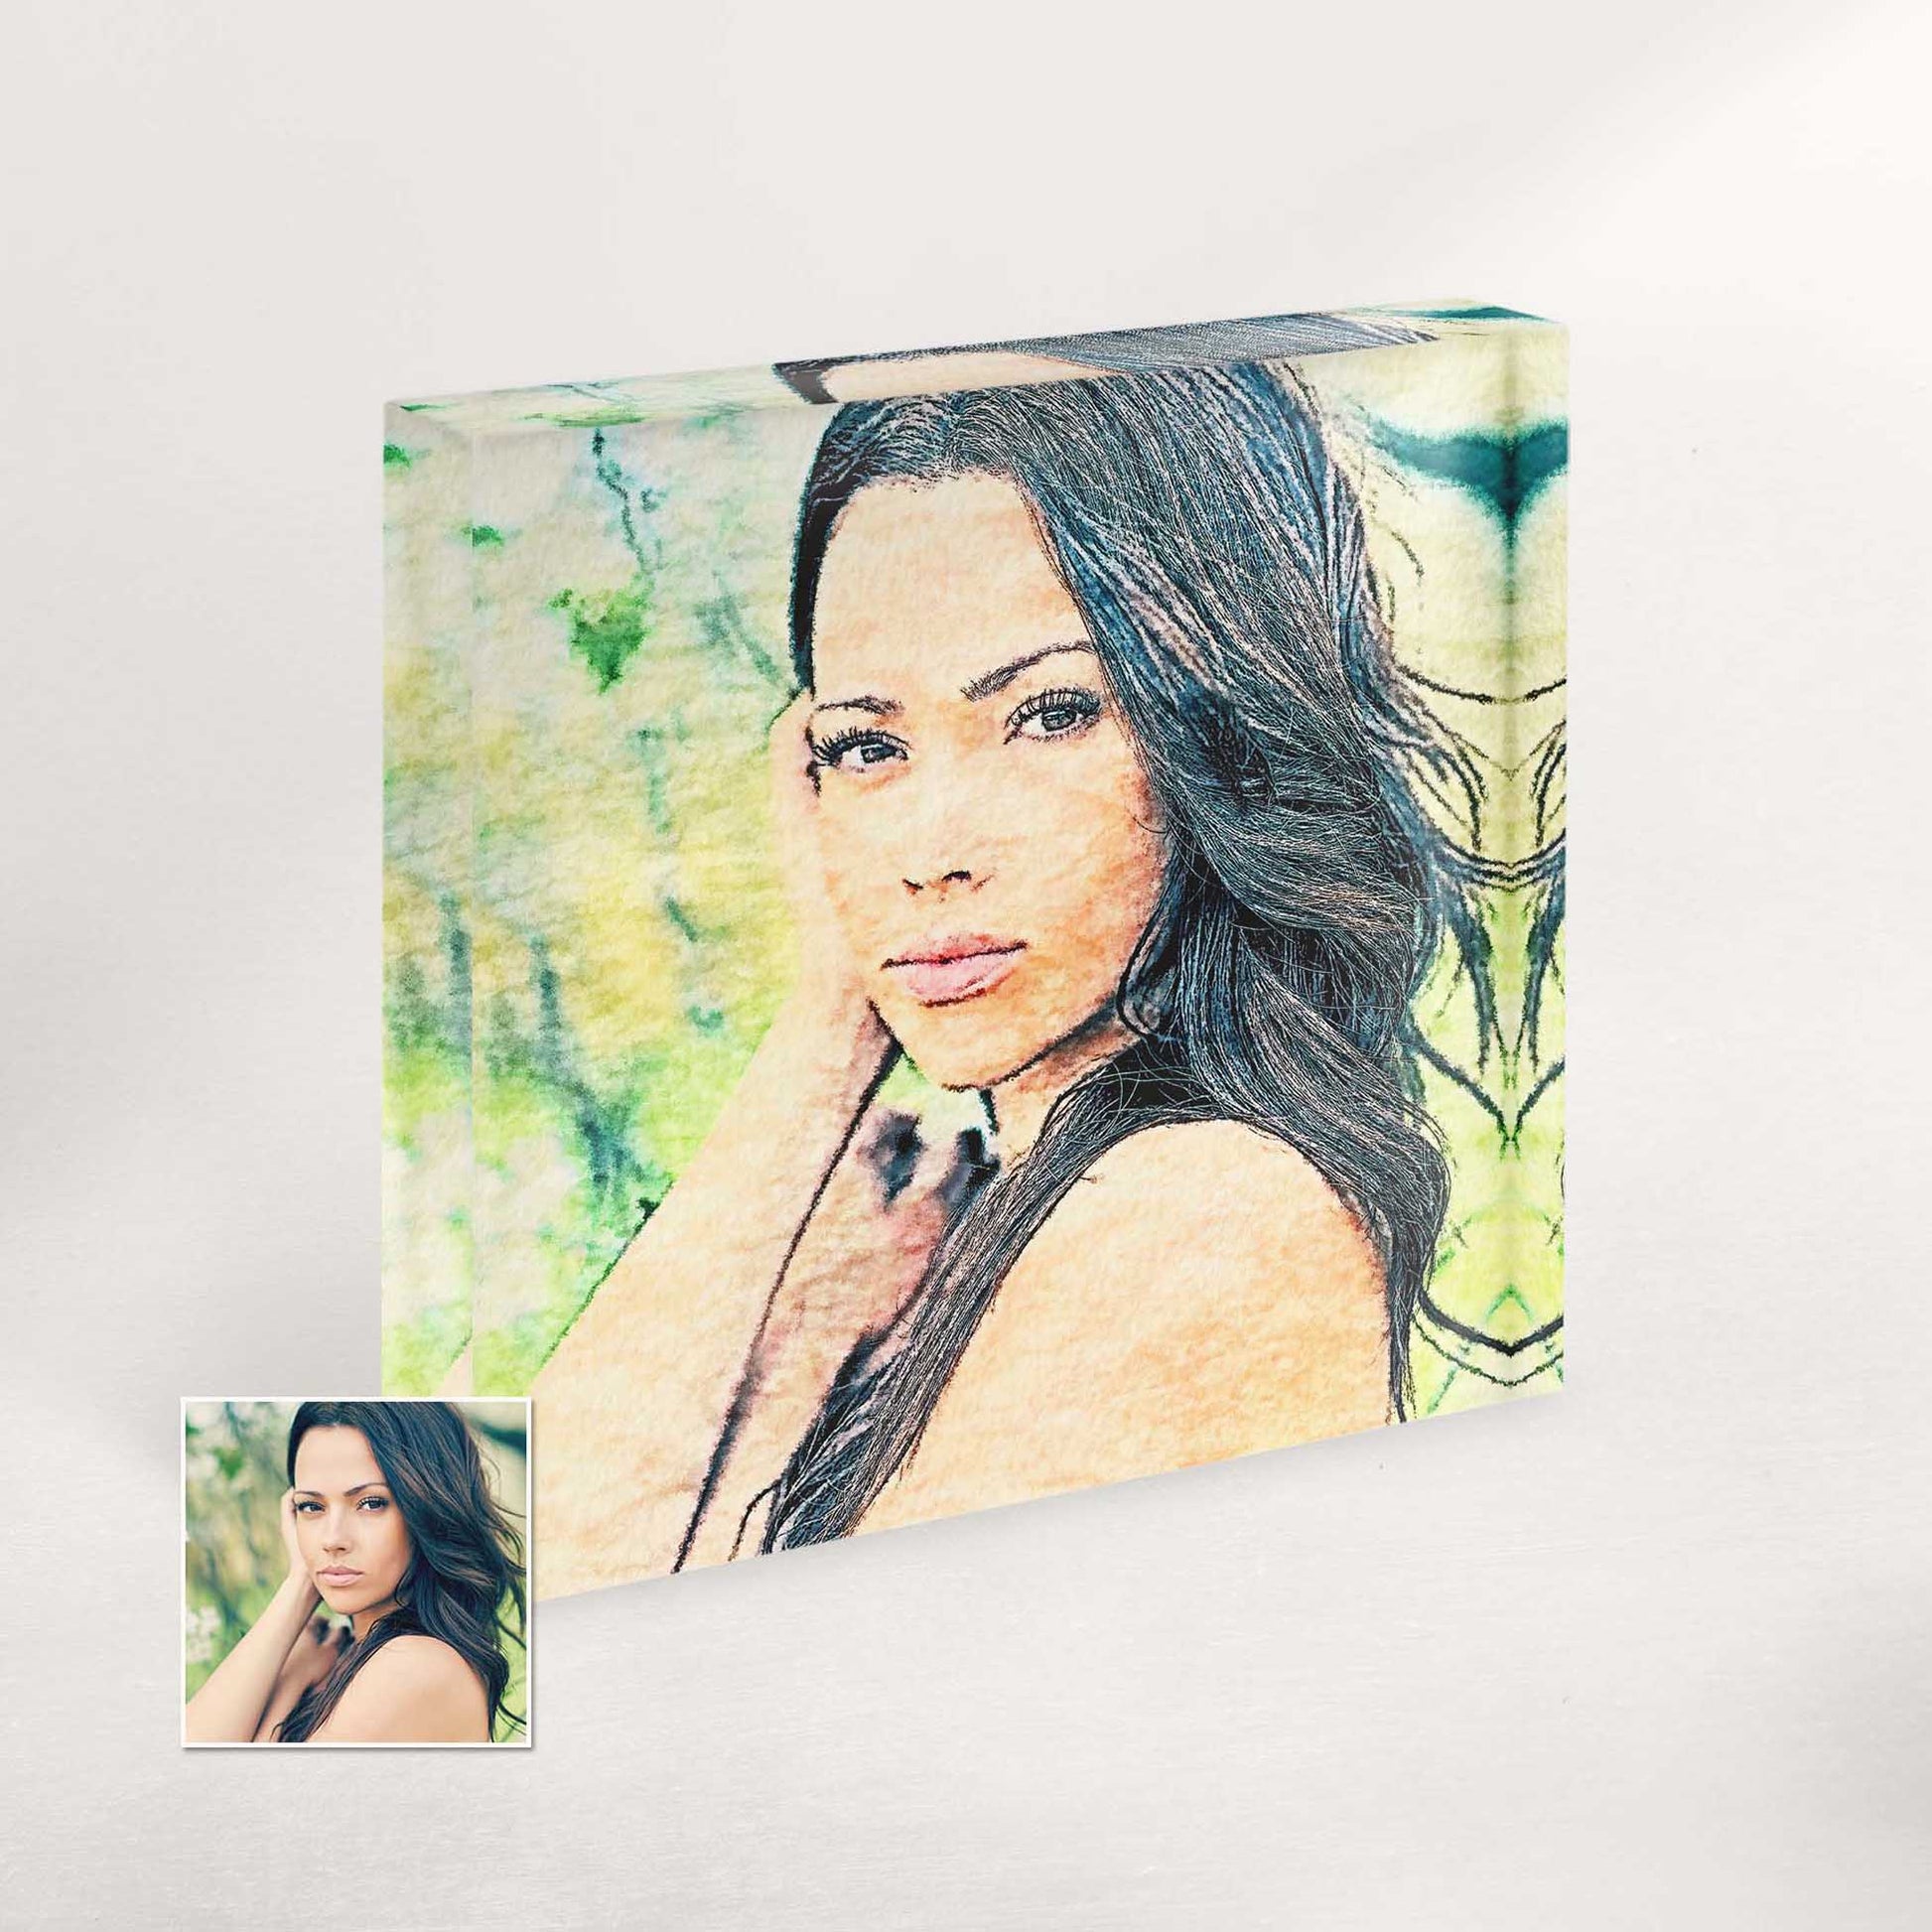 Immerse yourself in the world of personalized art with our acrylic block photos, showcasing vibrant watercolor paintings that transform any space into a gallery of individuality and creativity